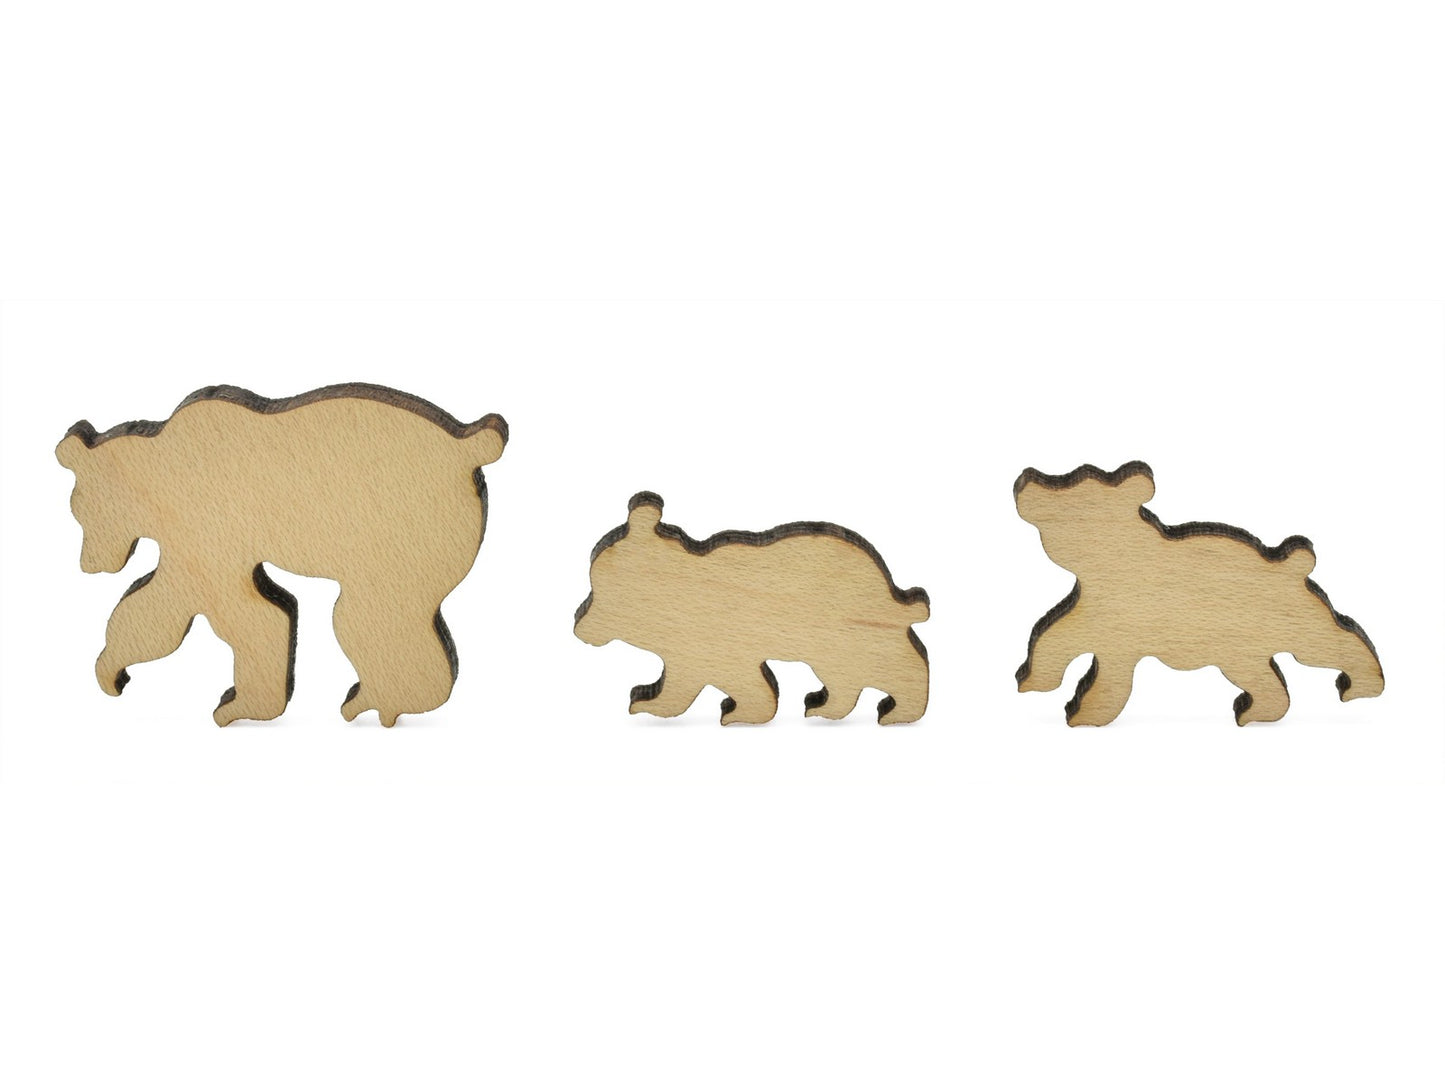 A closeup of pieces in the shape of three bears.